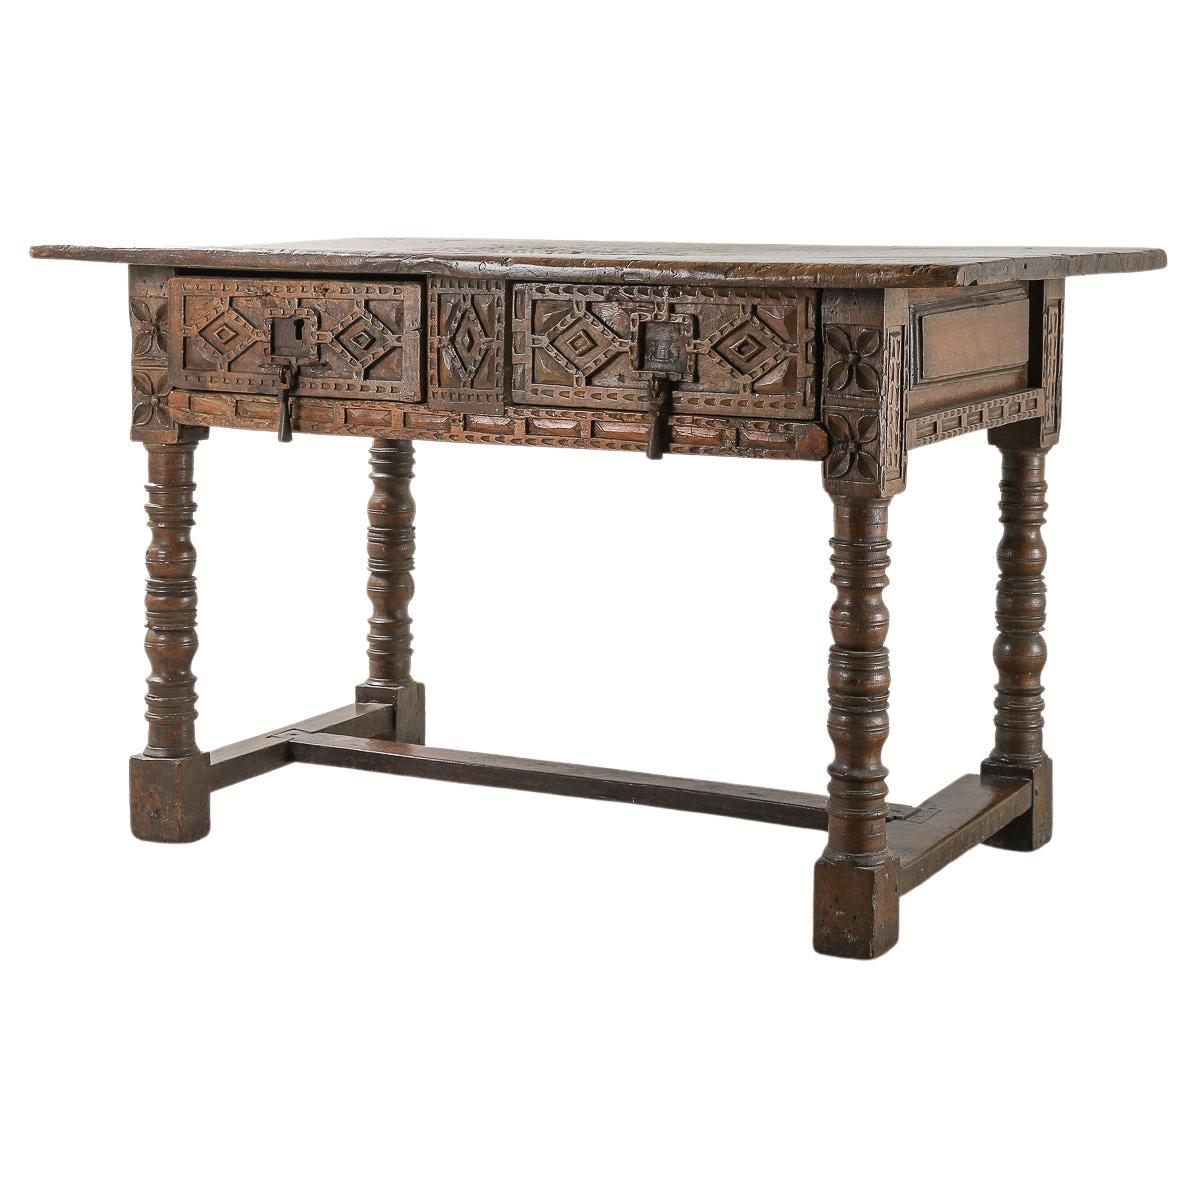 Spanish 17th Century Carved Desk For Sale